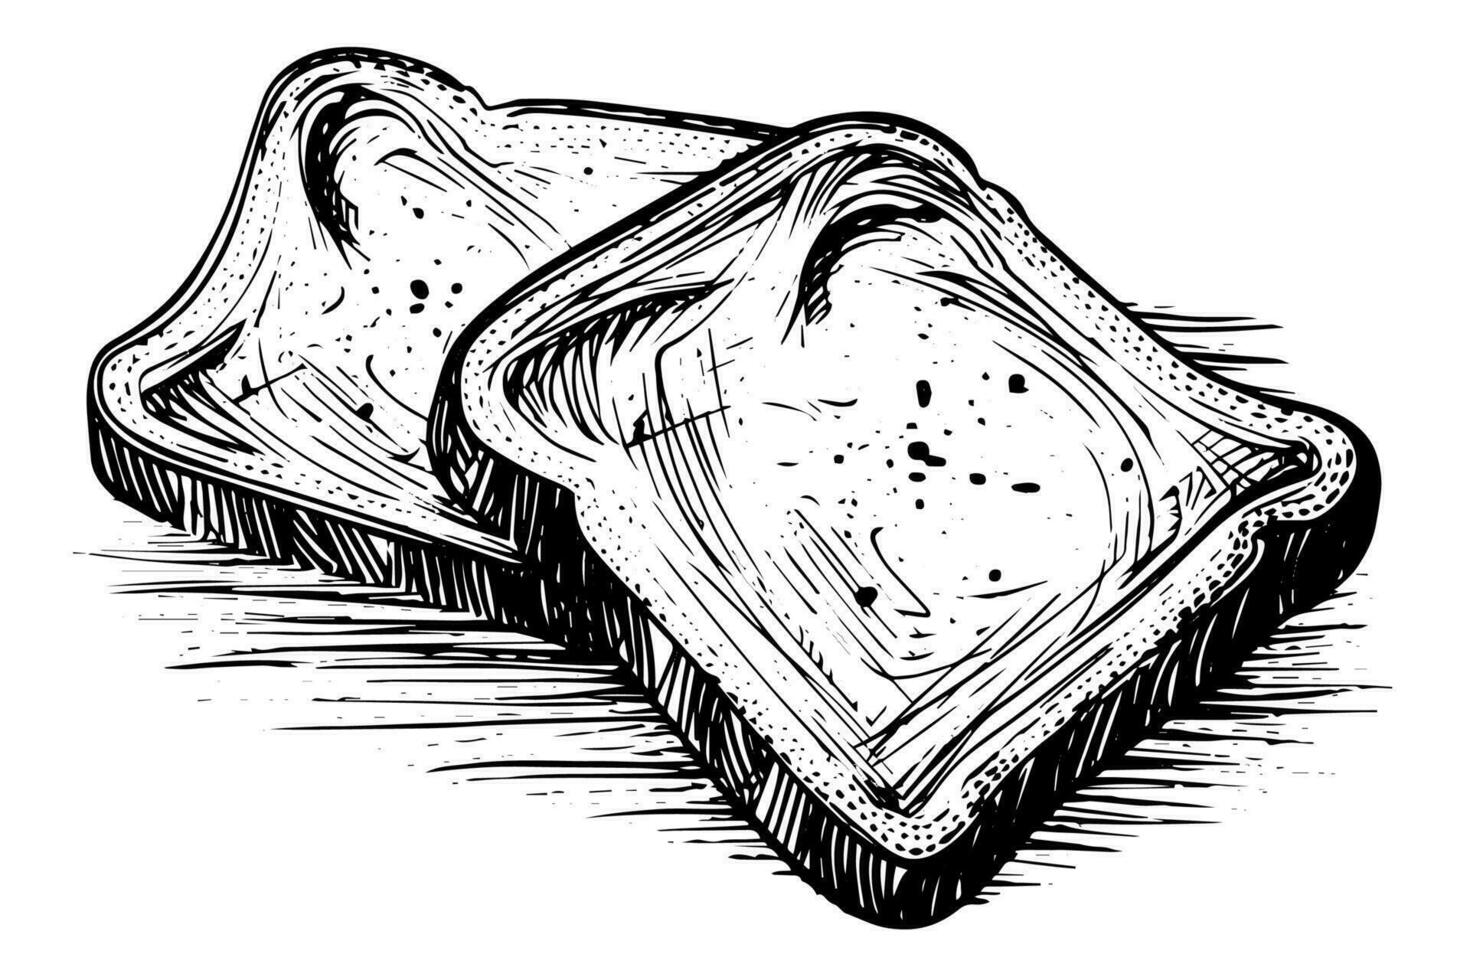 Toast slices sketch. Bread engraving in hand drawn style vector illustration.